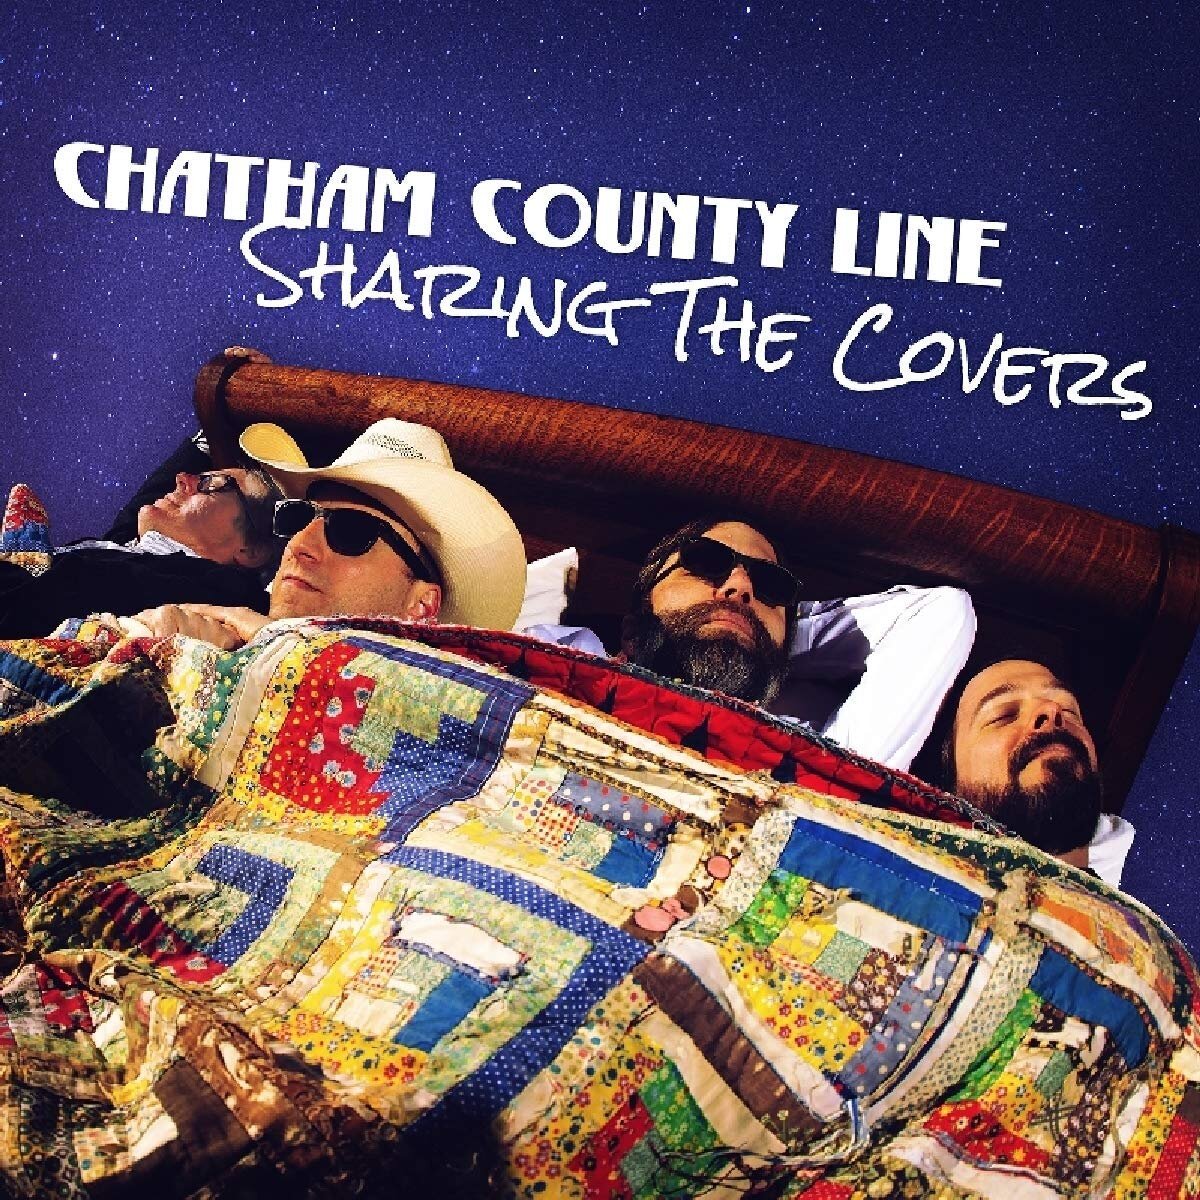 Chatham Country Line - Sharing The Covers